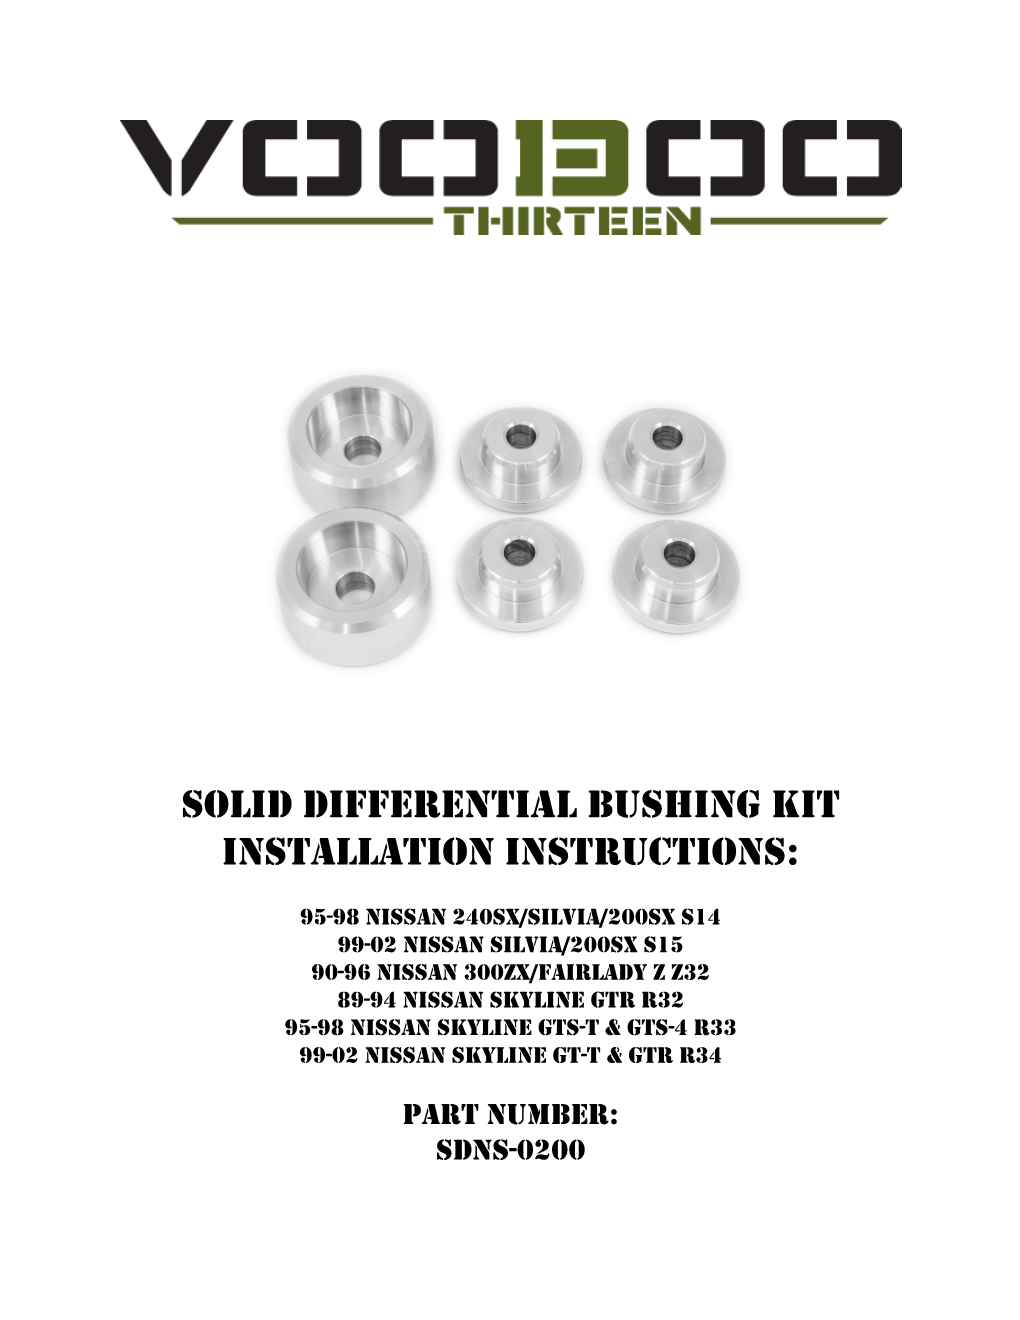 Solid Differential Bushing Kit INSTALLATION INSTRUCTIONS